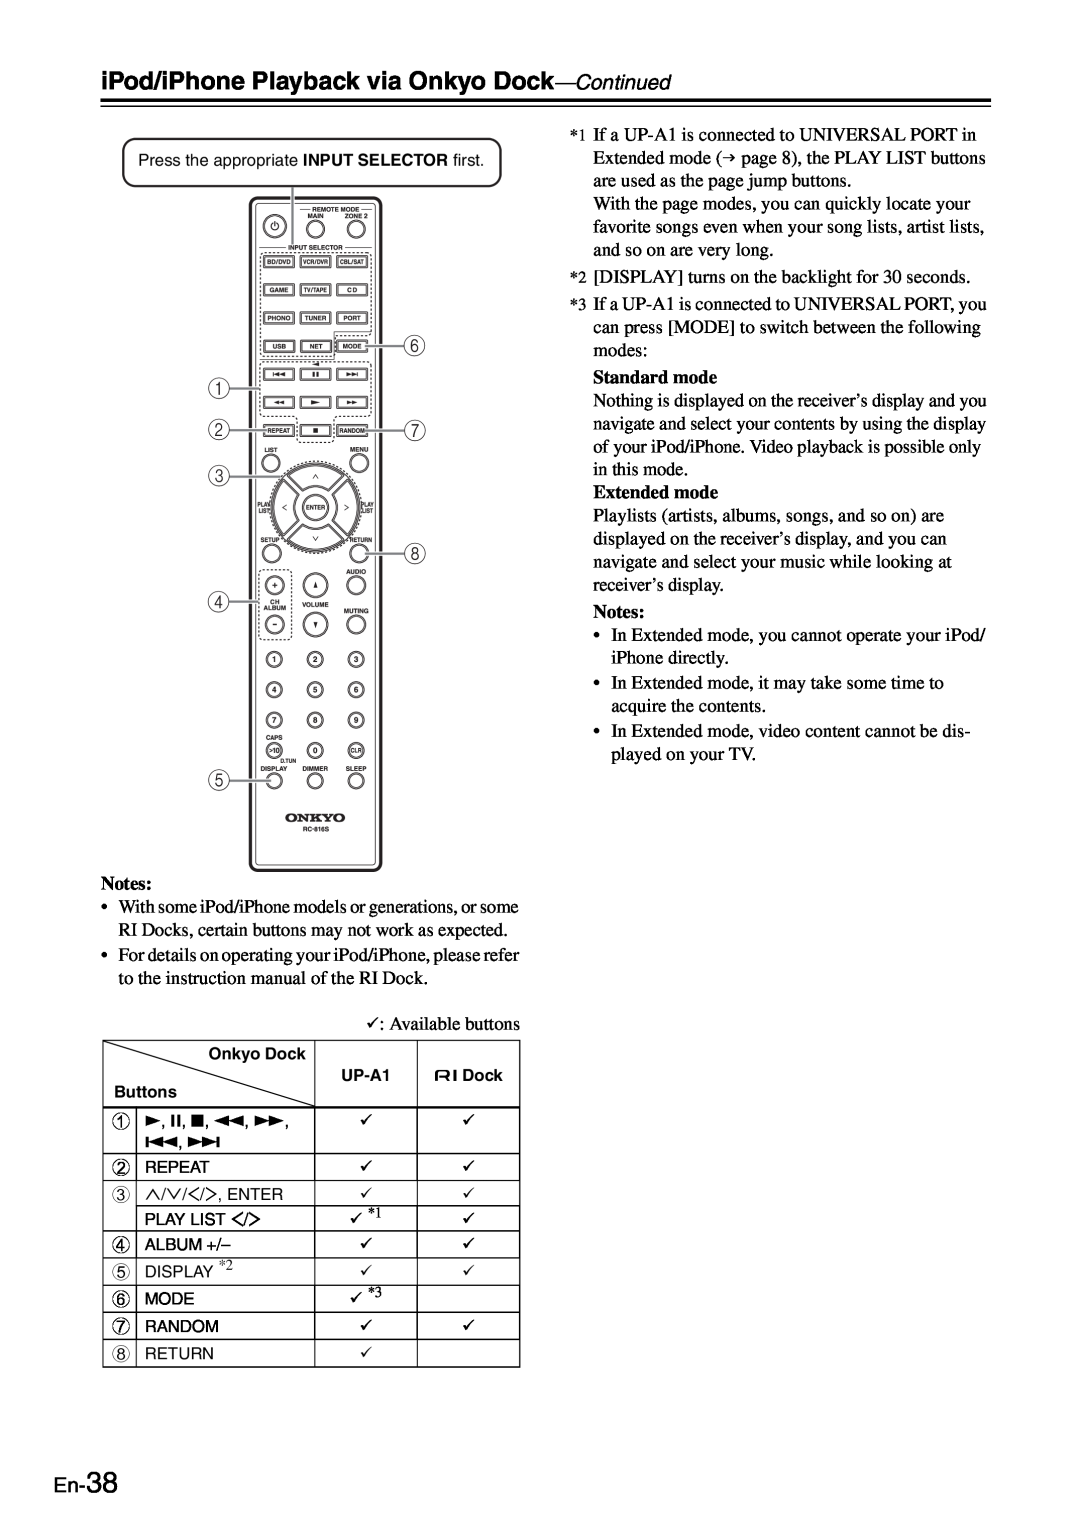 Onkyo TX-8050 instruction manual En-38, iPod/iPhone Playback via Onkyo Dock-Continued, Standard mode, Extended mode 